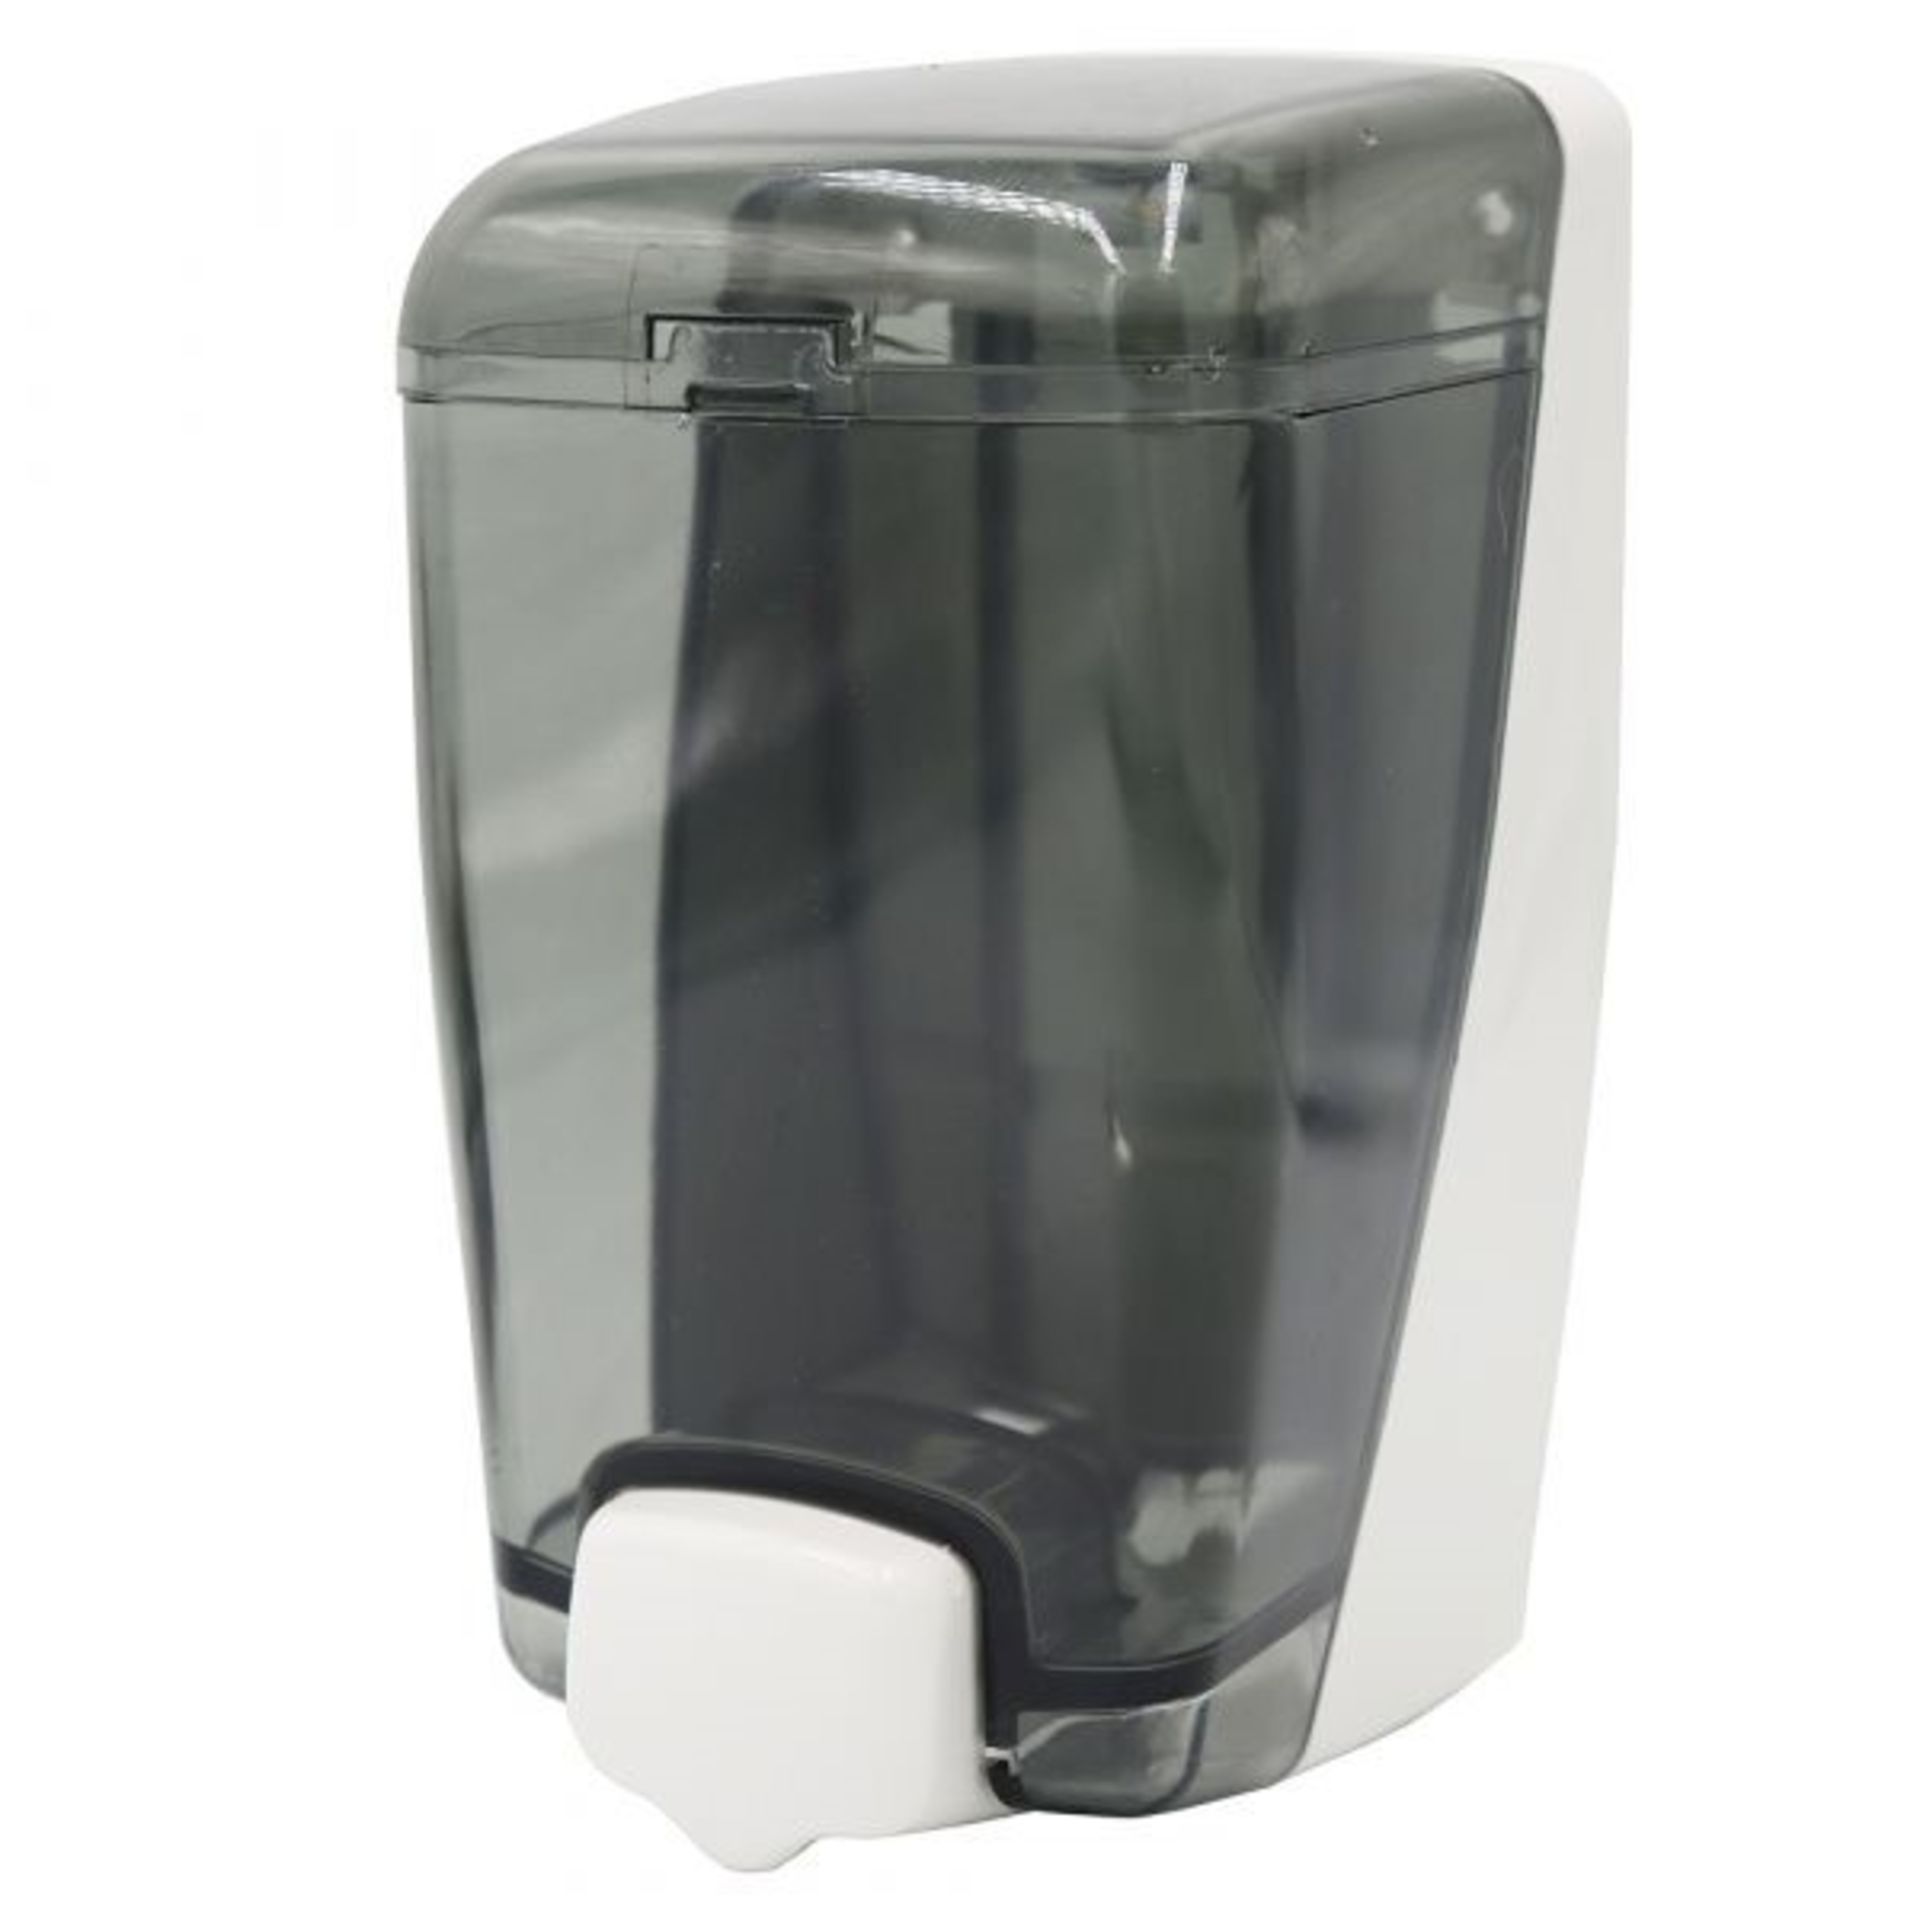 64 x Azure 1000ml Refillable Liquid Soap Dispensers - Suitable For 70% Ethanol Alcohol Gels and - Image 6 of 6